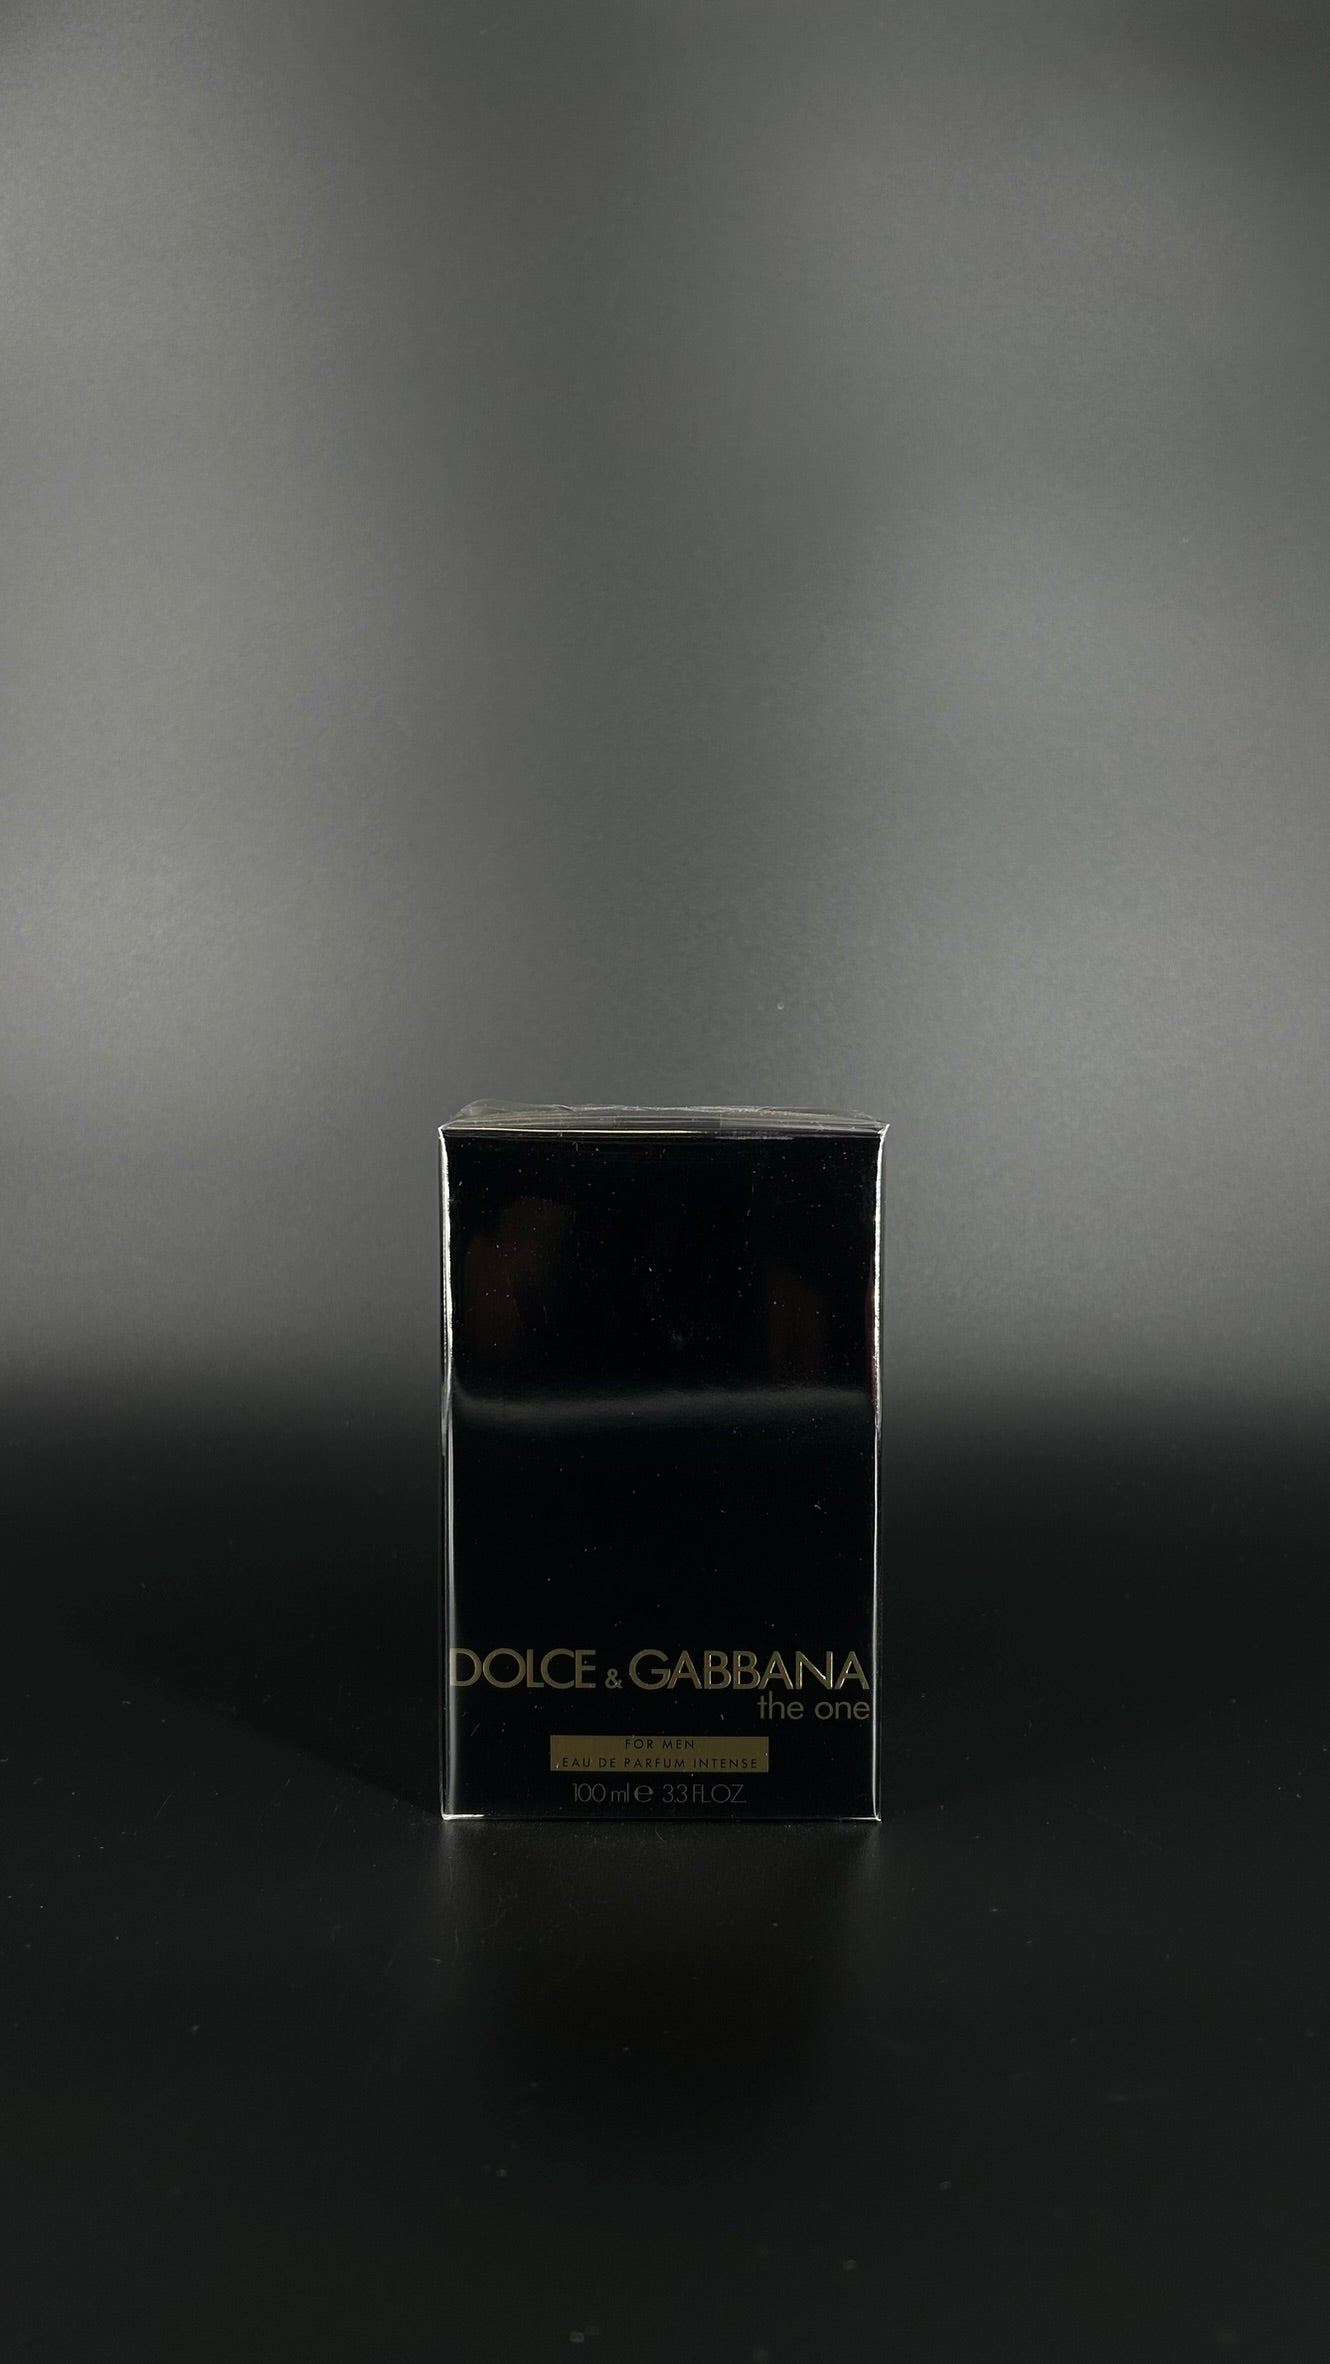 Dolce & Gabbana The One Intense Pour Homme 100ml EDP